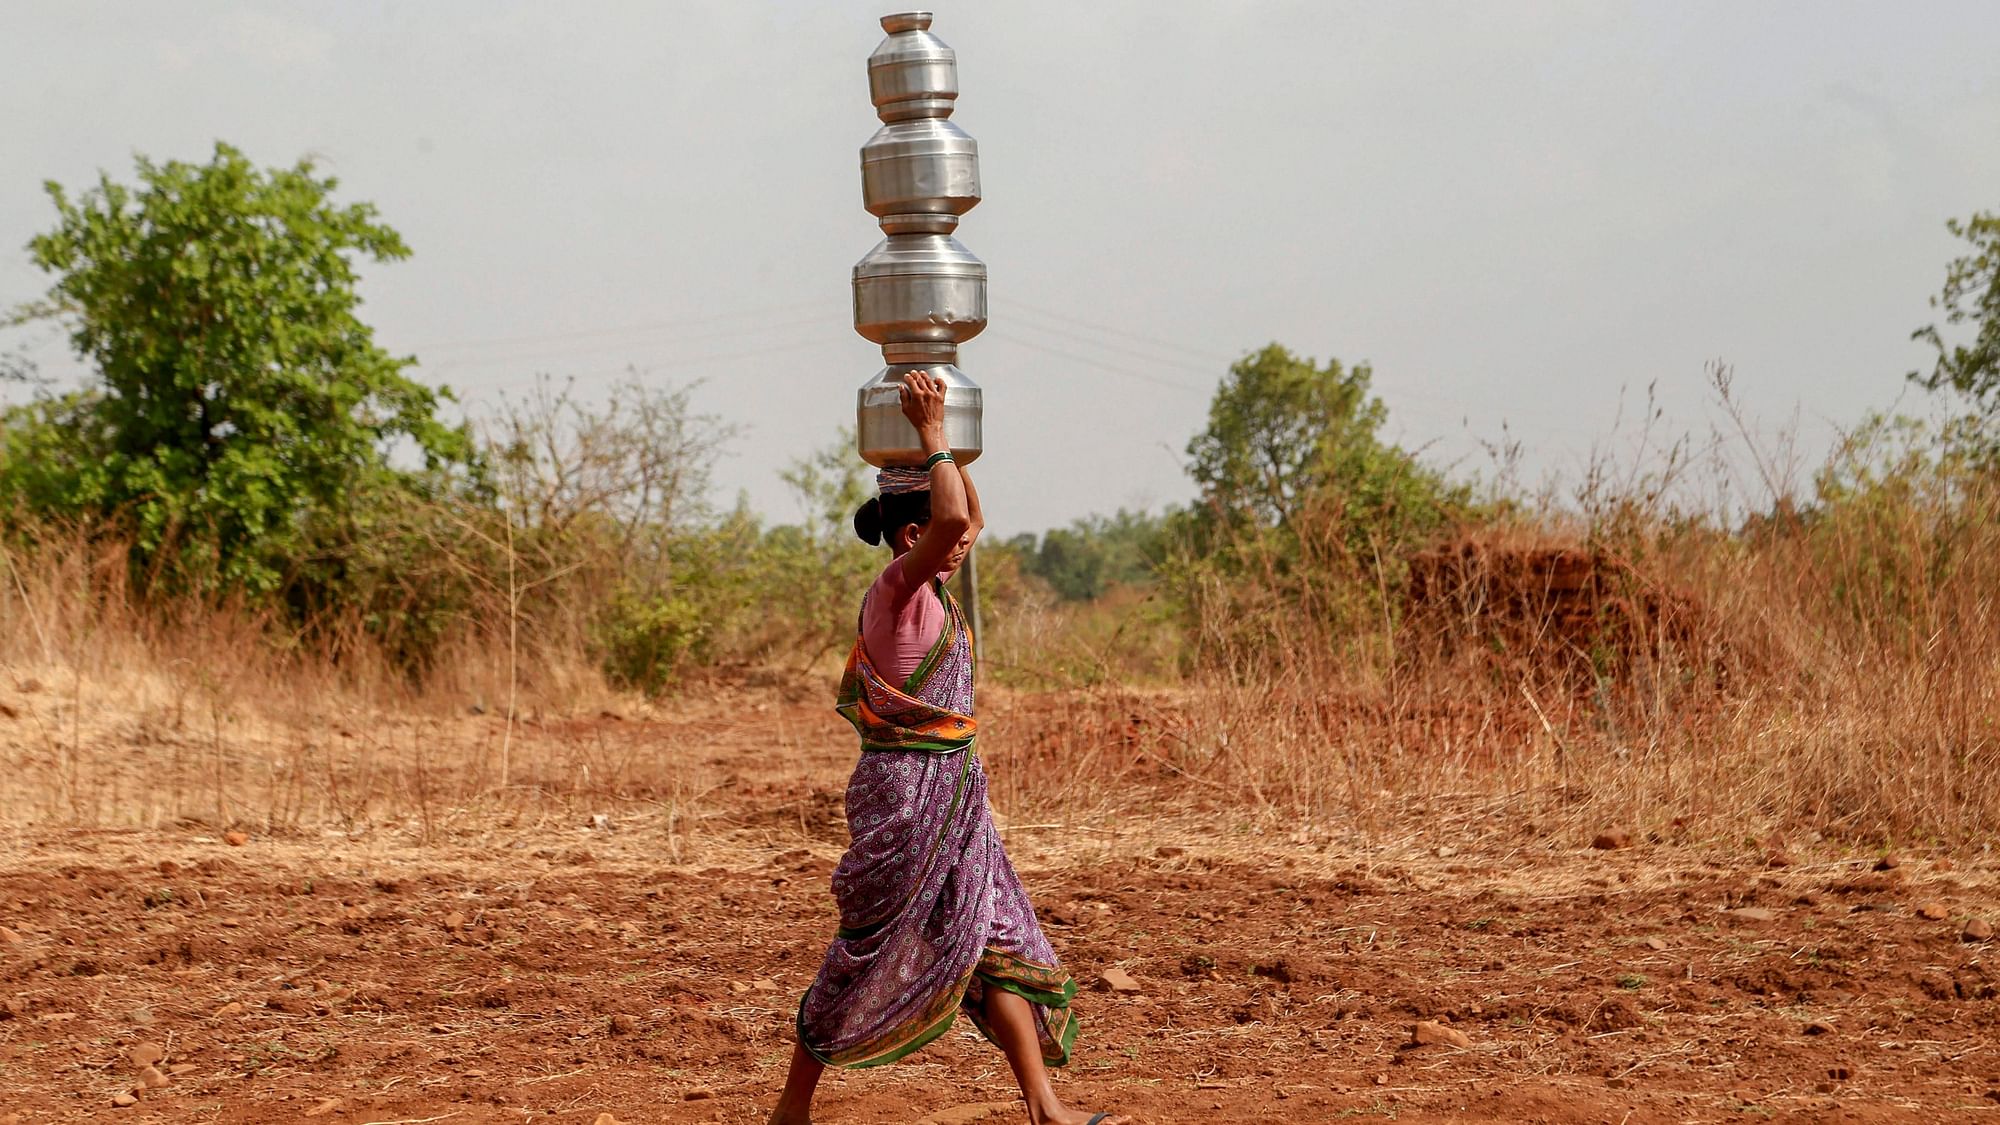  A woman carries multiple pots as she fetches water from a well, in Dhasai village of Thane district.